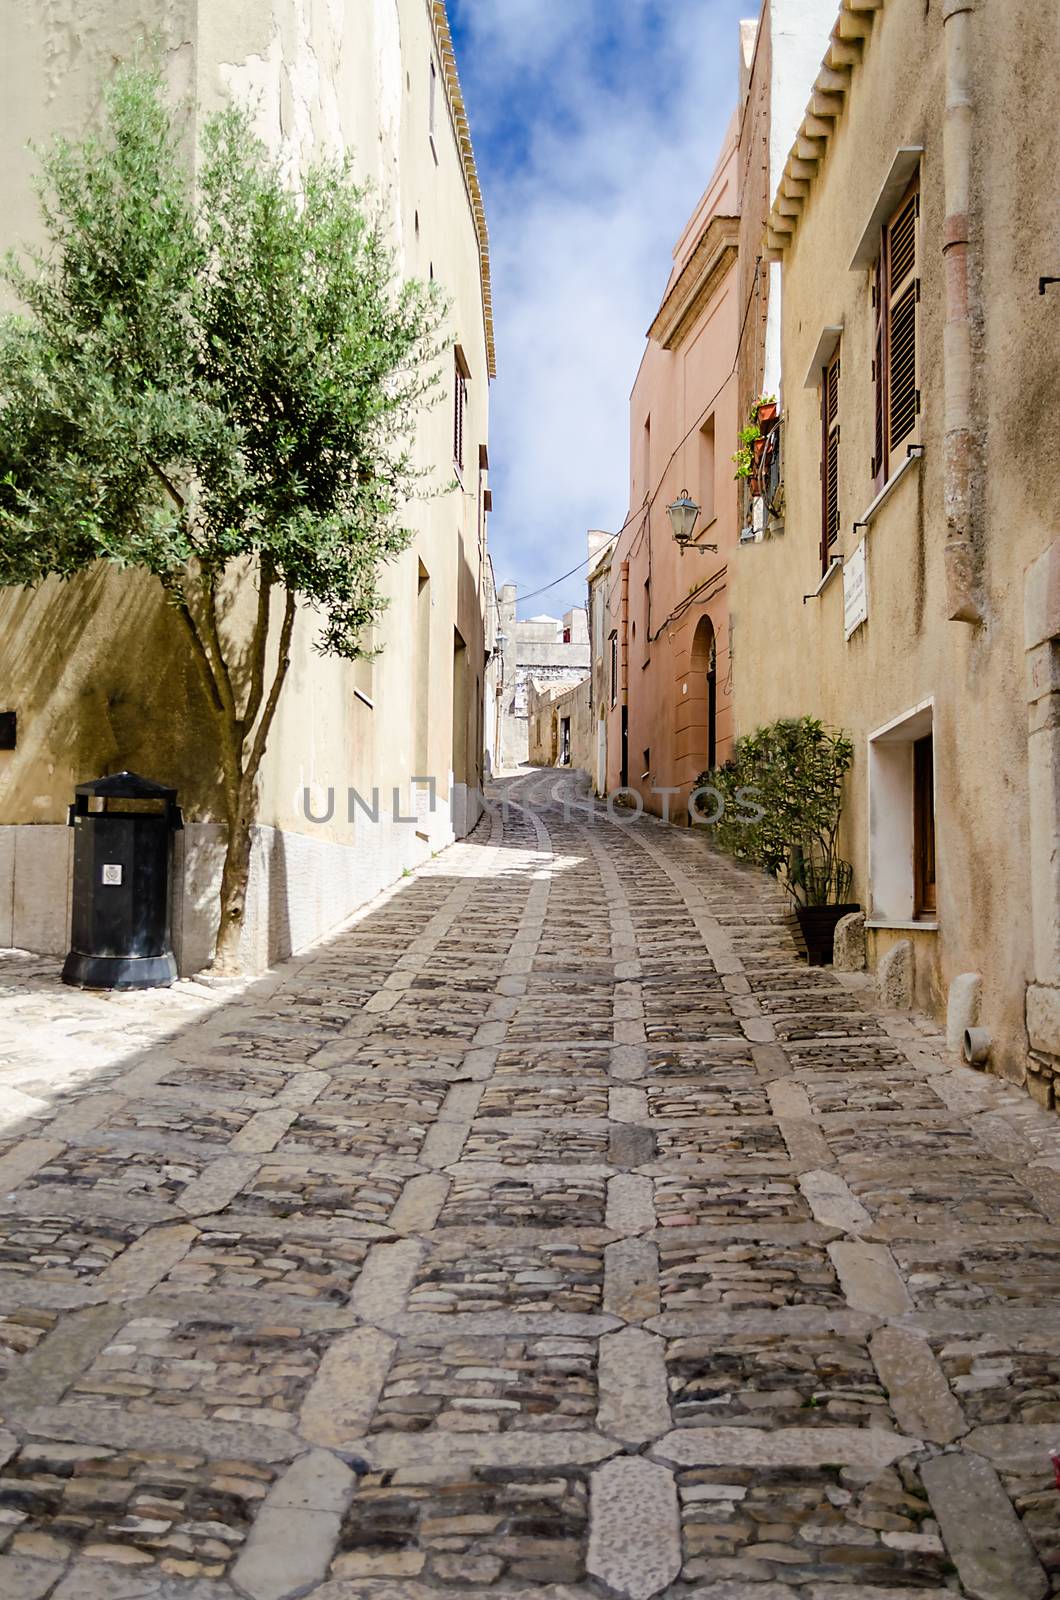 Stone Paved Old Street in Erice, Sicily, Italy